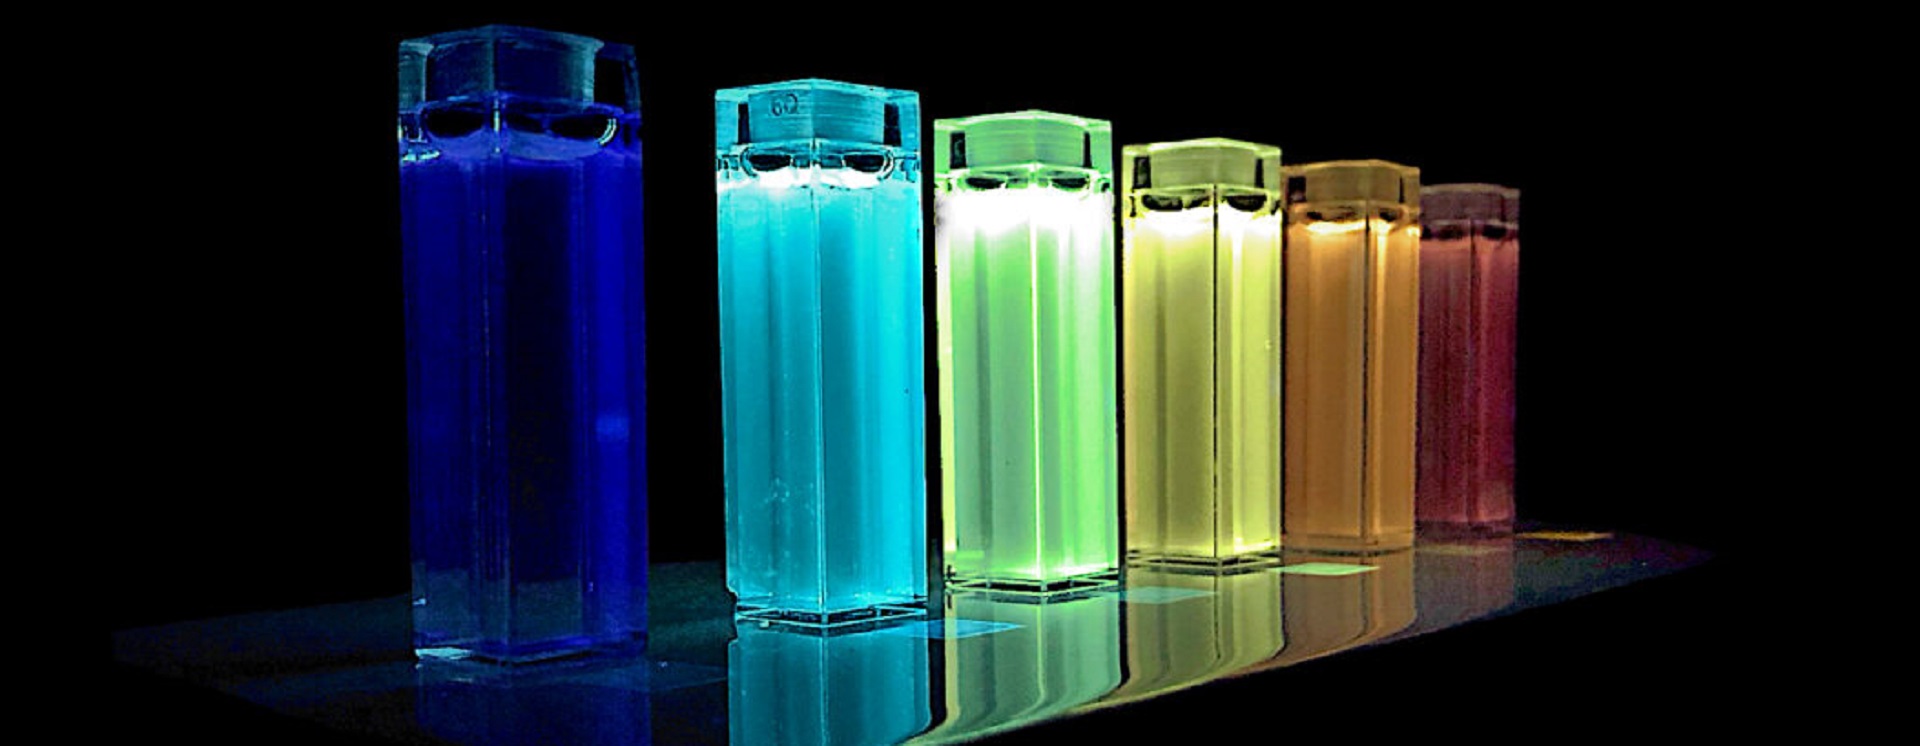 ChromaTwist fluourescent dyes in test tubes 